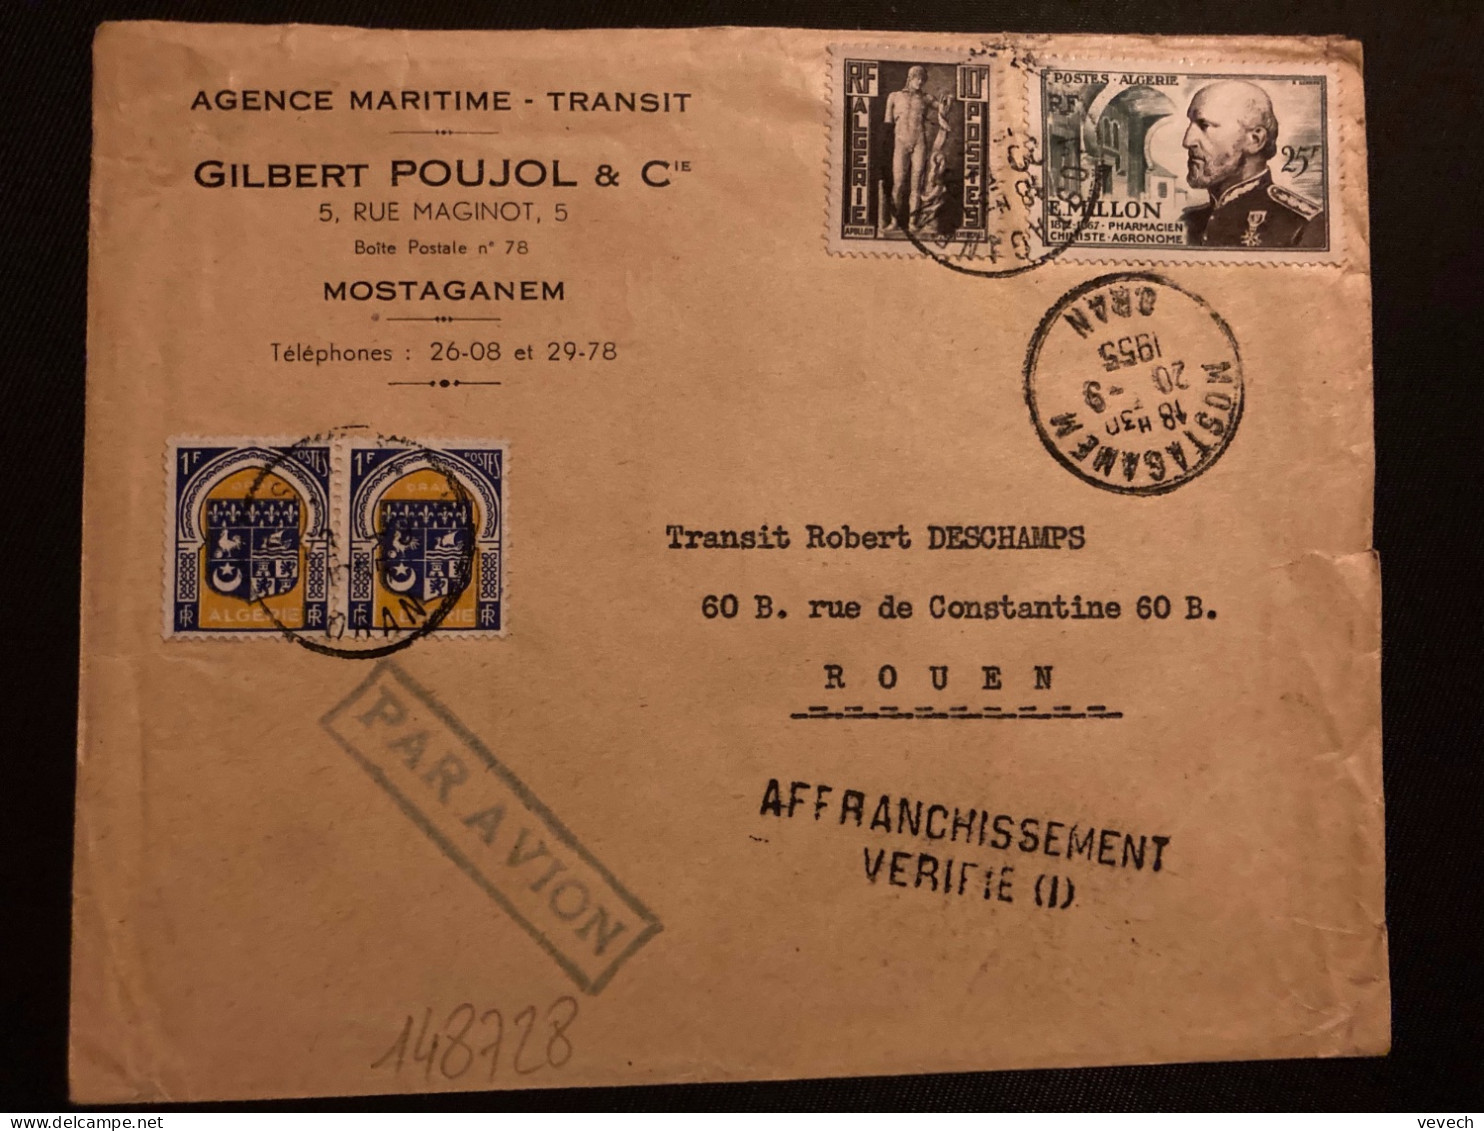 LETTRE AGENCE MARITIME GILBERT POUJOL TP MILLON 25F + 10F + BLASON 1F Paire OBL.20-9 1955 MOSTAGANEM + GRIFFE AFFRANCHIS - Covers & Documents